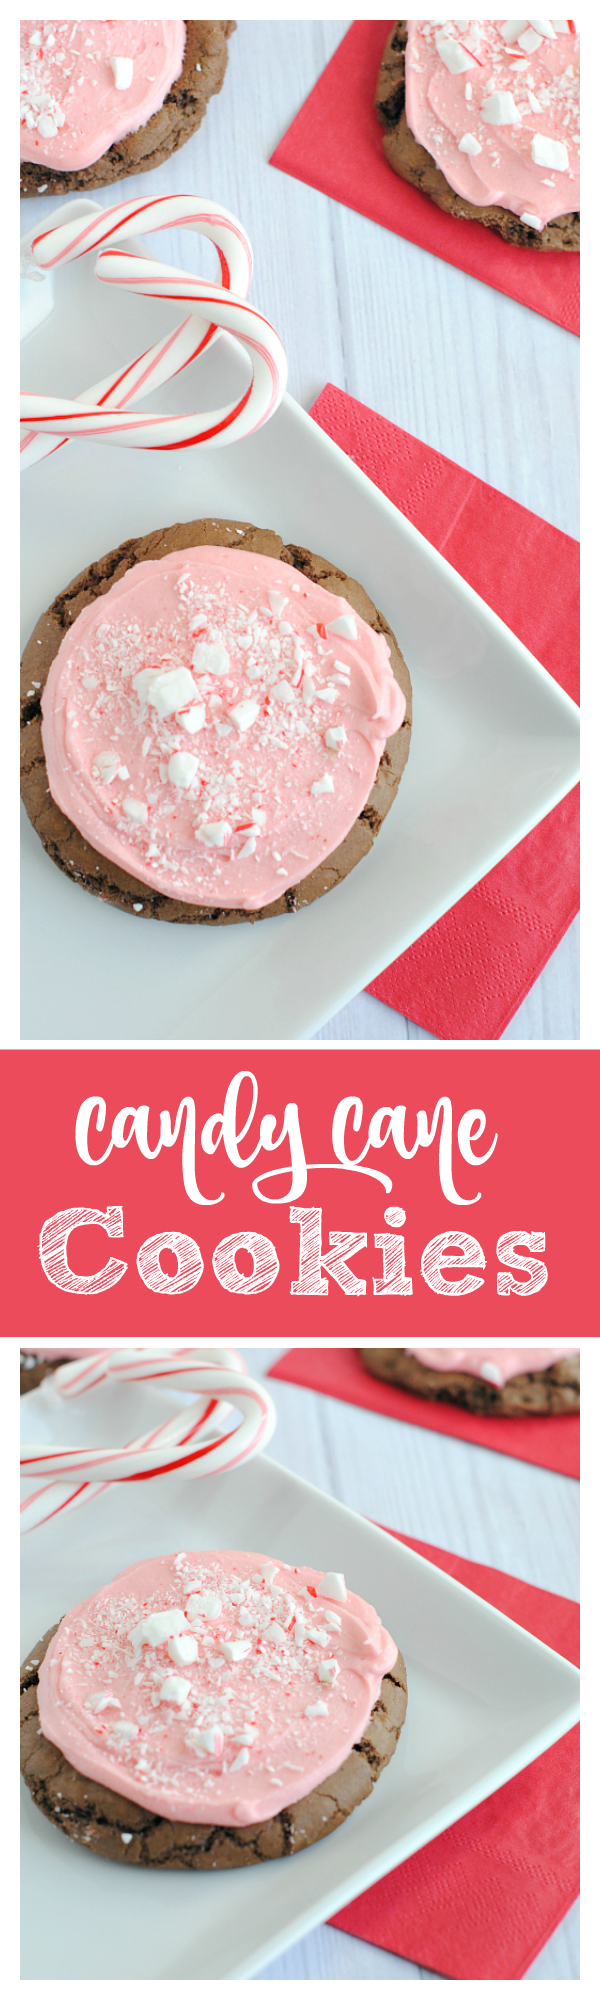 Candy Cane Christmas Cookies Recipe-These chocolate peppermint cookies are a perfect Christmas treat! Crushed candy cane on top of mint frosting and a soft and chewy chocolate cookie. #christmas #cookies #candycane #christmascookies